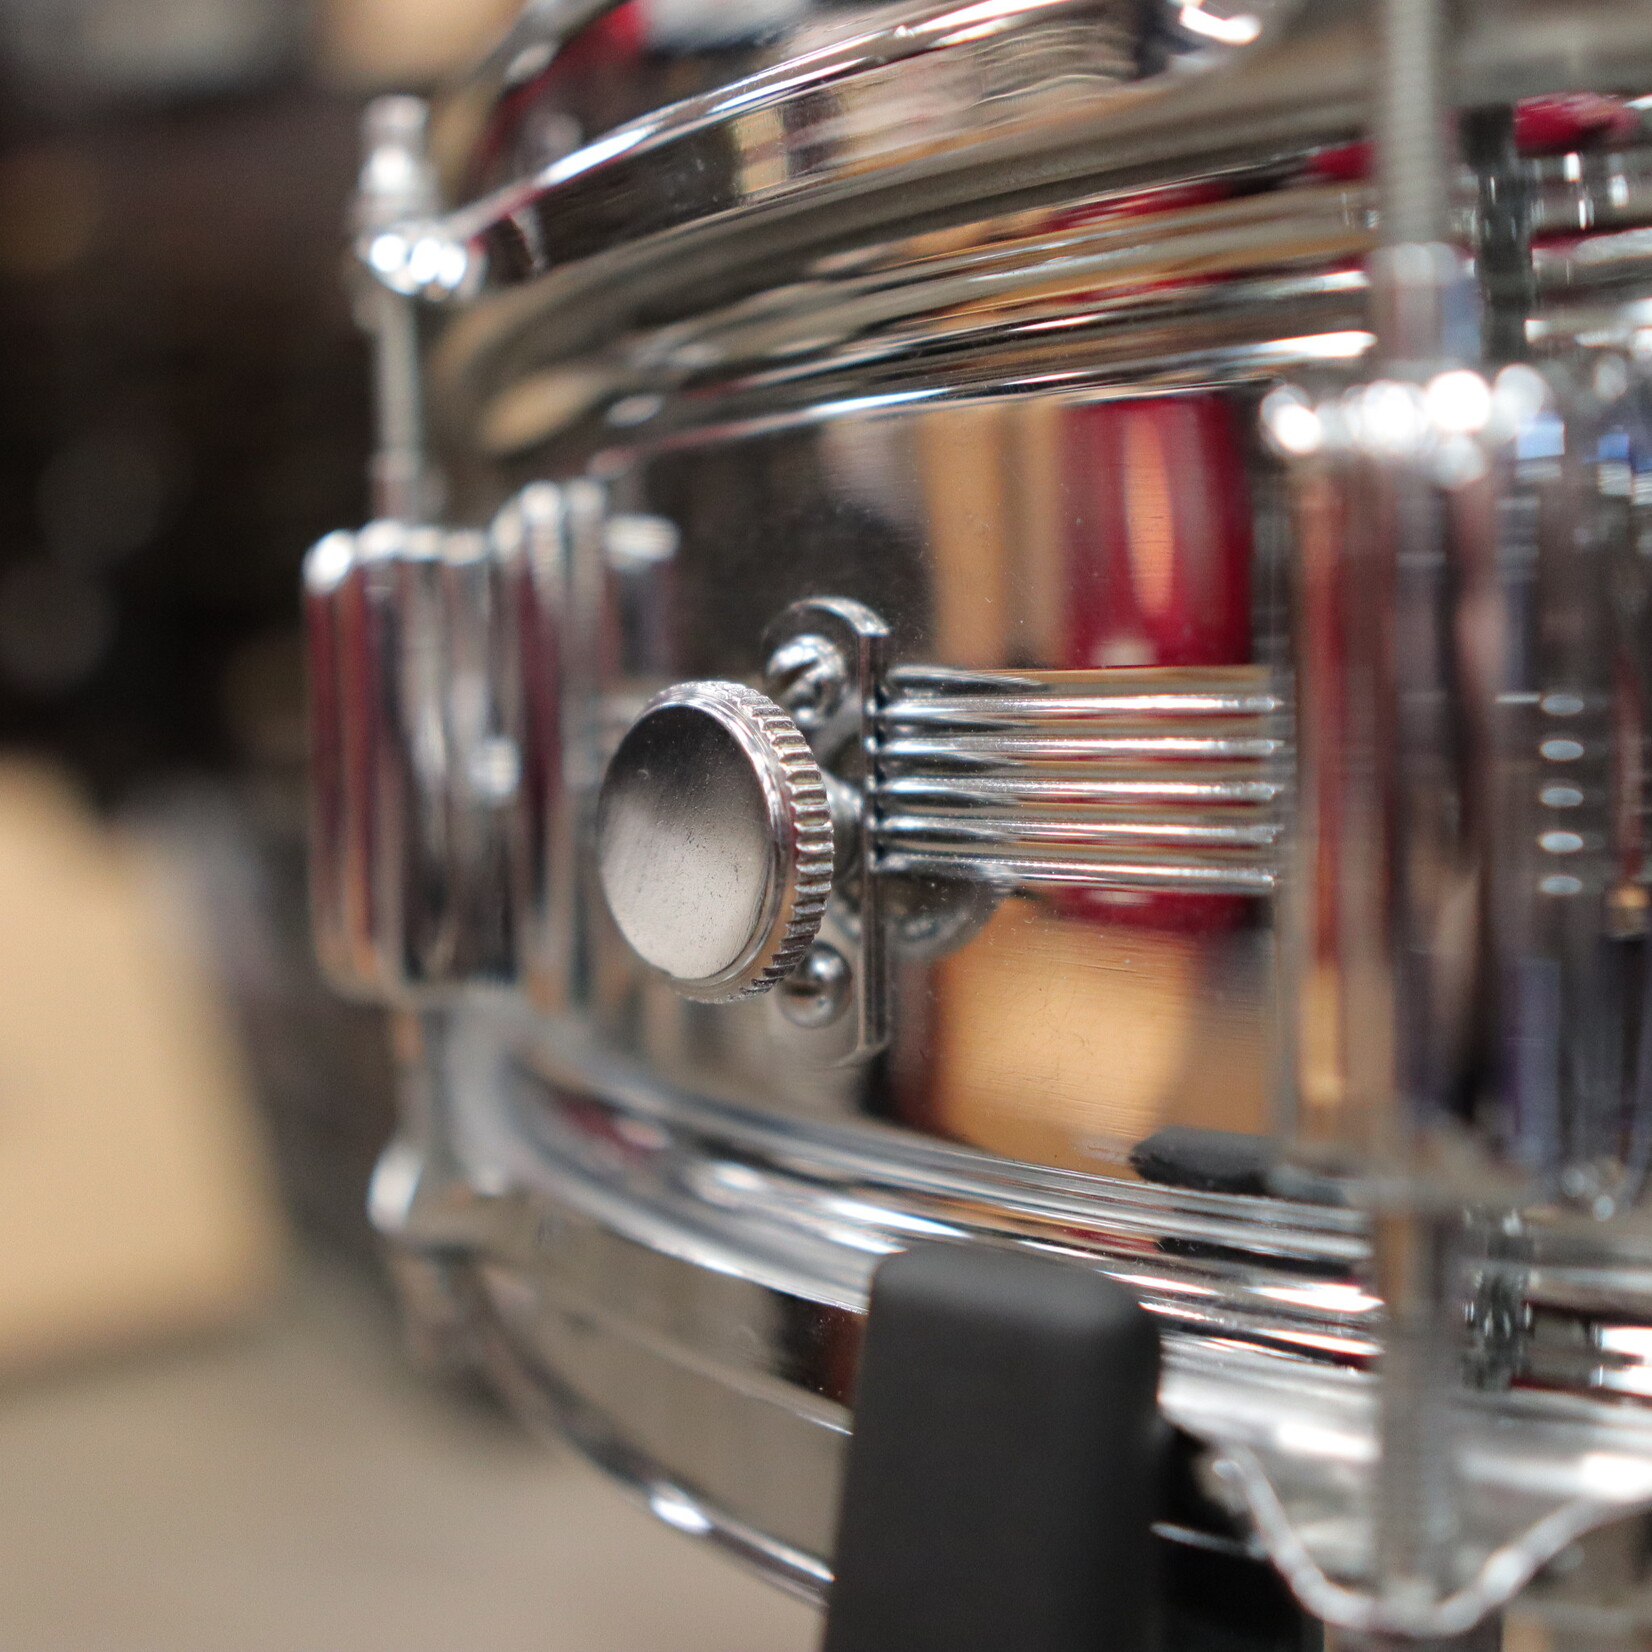 Rogers Late 60s/ Early 70s Rogers 5x14" Dyna-Sonic Snare Drum (Chrome Over Brass)